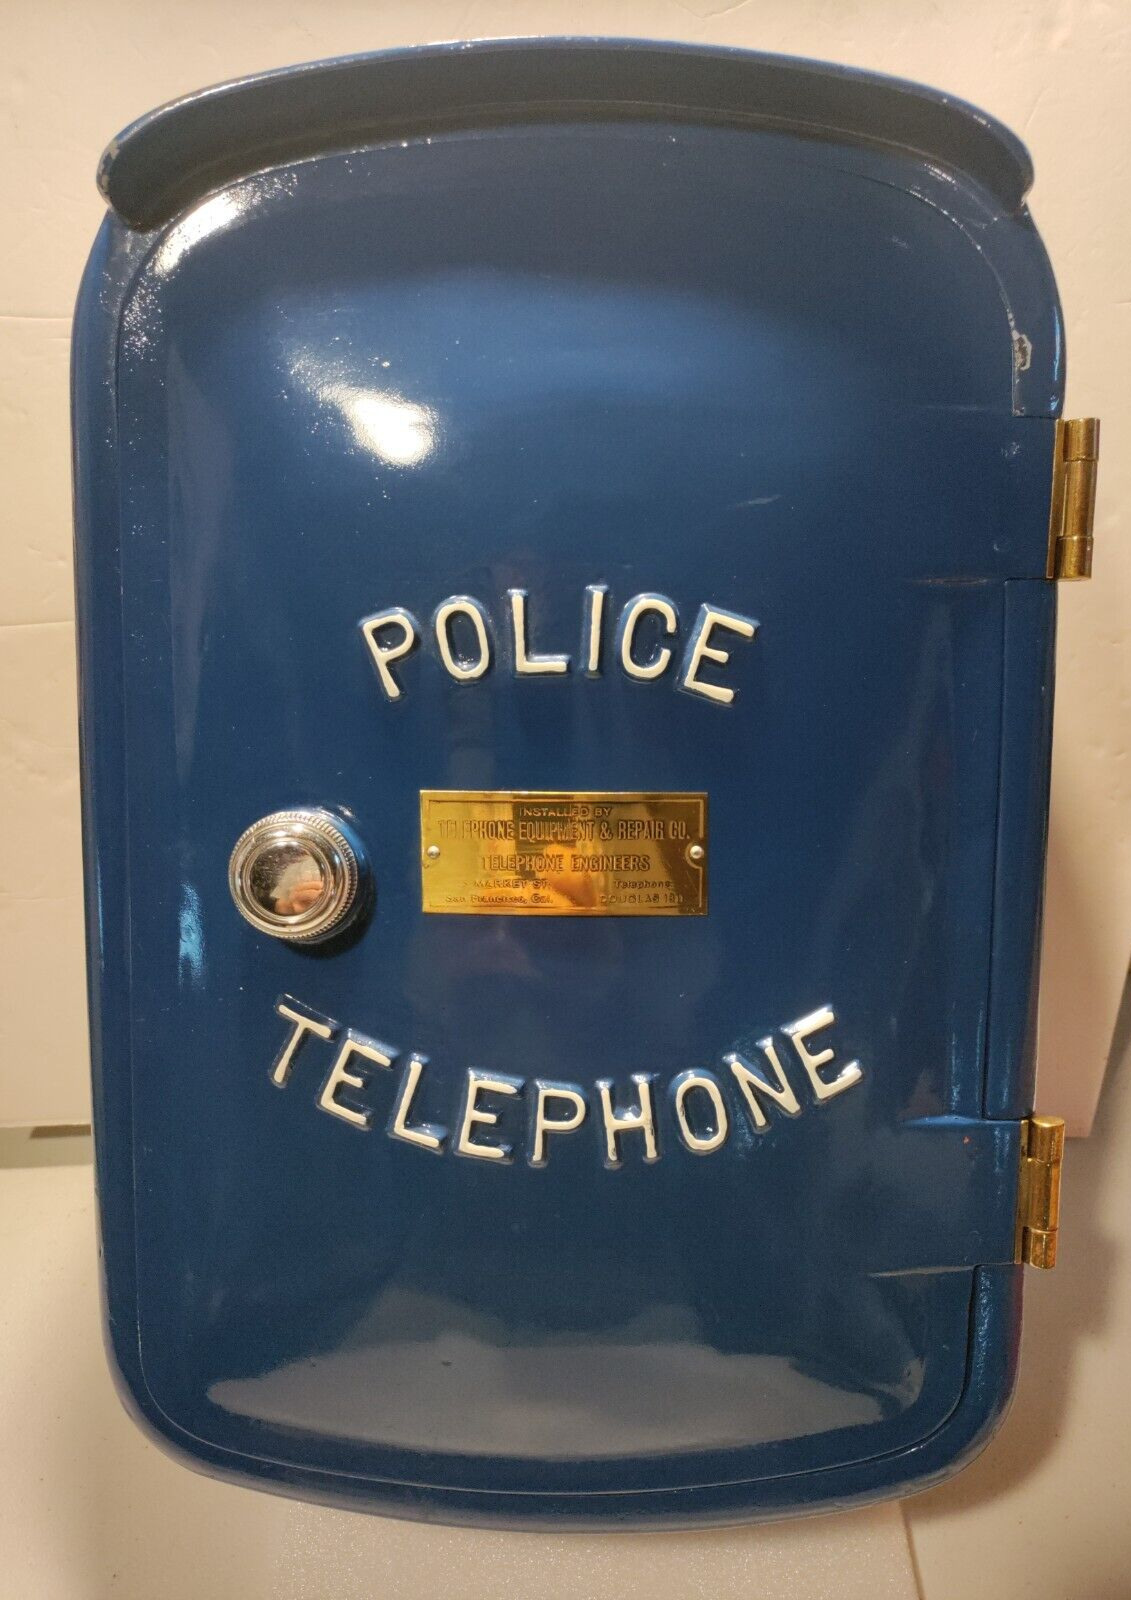 Vintage Police Call Box,Telephone Service Repair Co. San Francisco,Like Gamewell